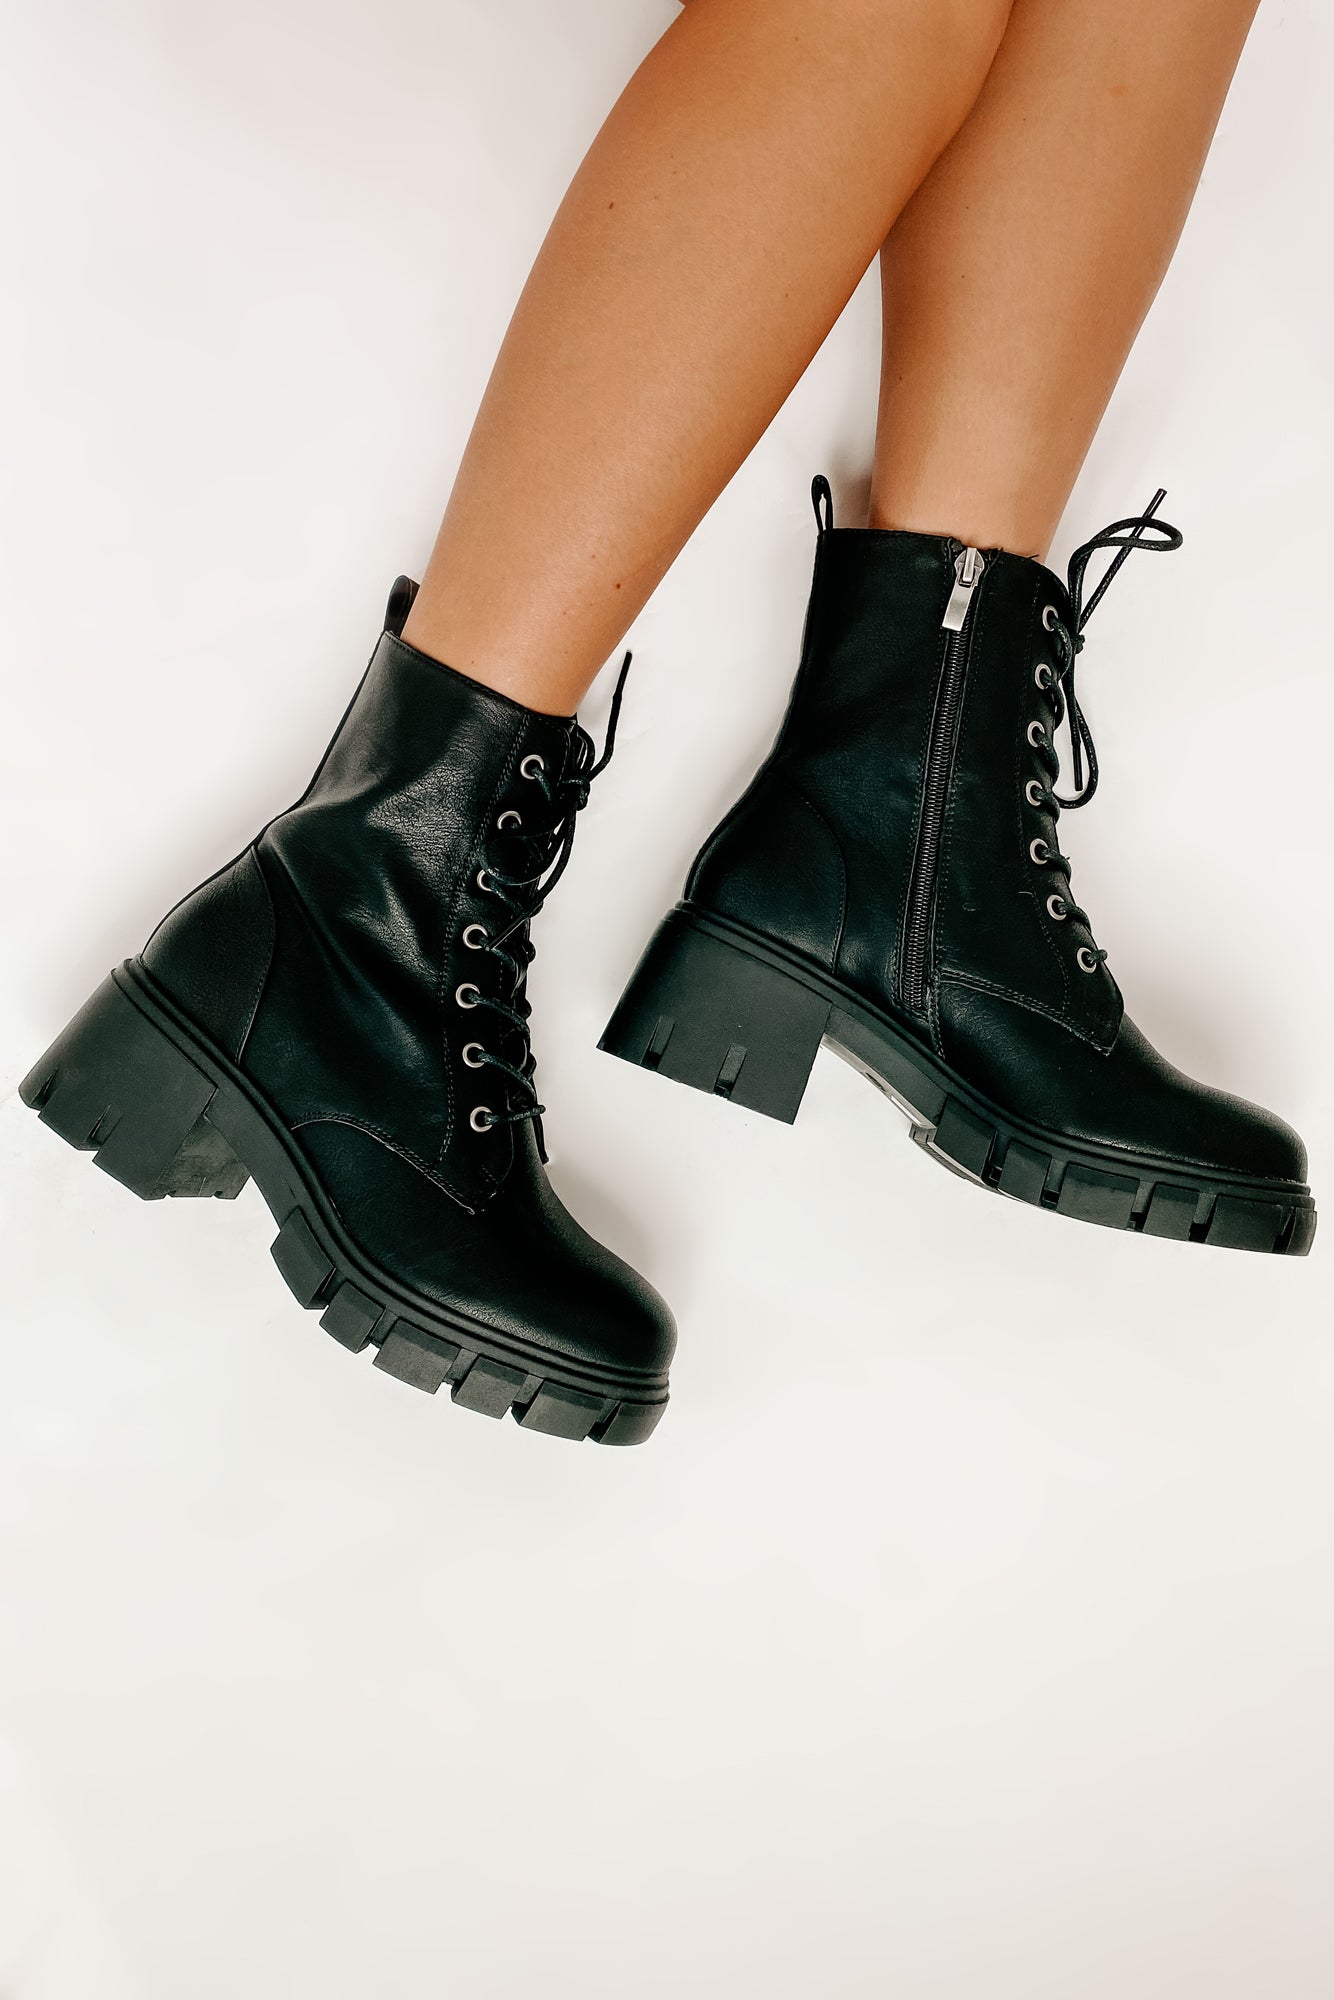 Questionable Intentions Chunky Faux Leather Combat Boots (Black) · NanaMacs